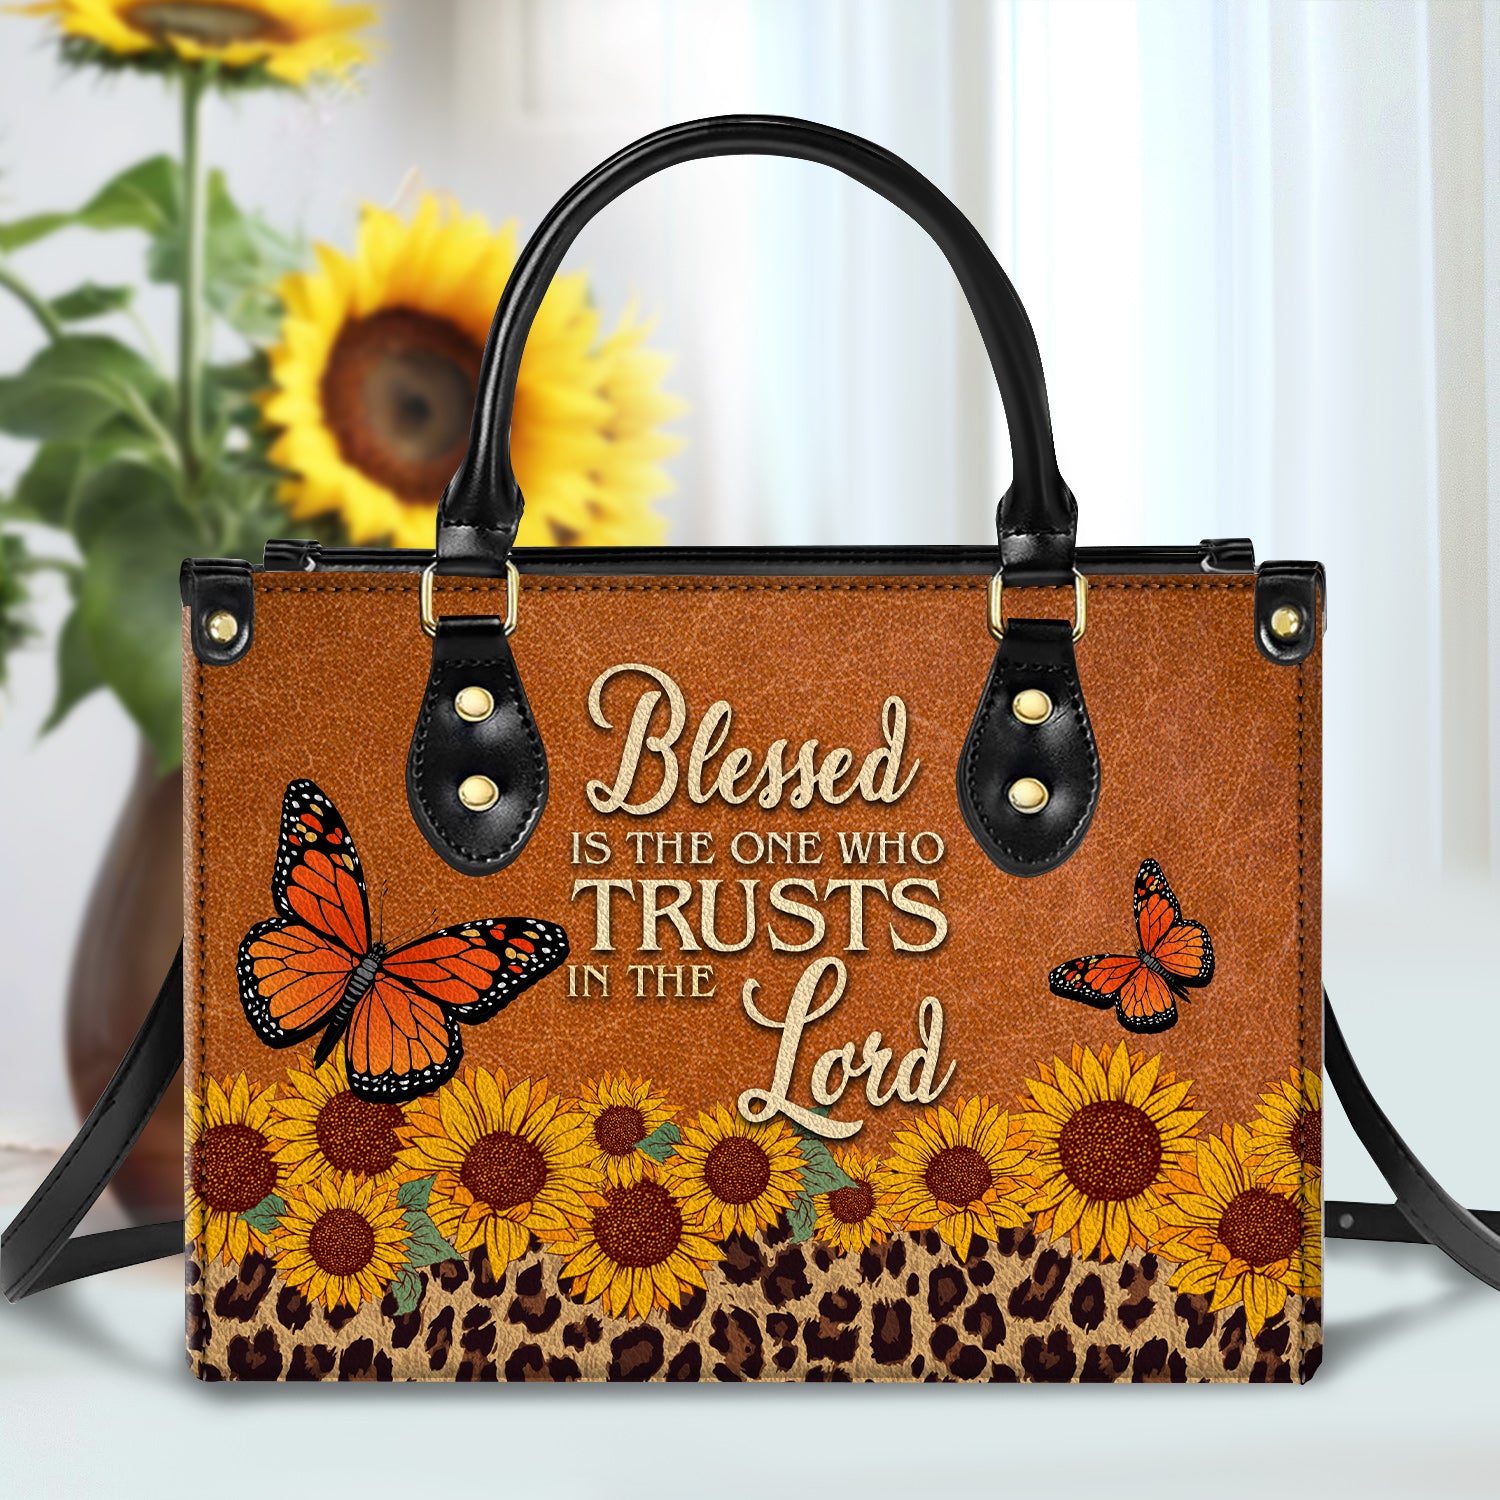 Blessed Is The One Who Trusts In The Lord Leather Handbag